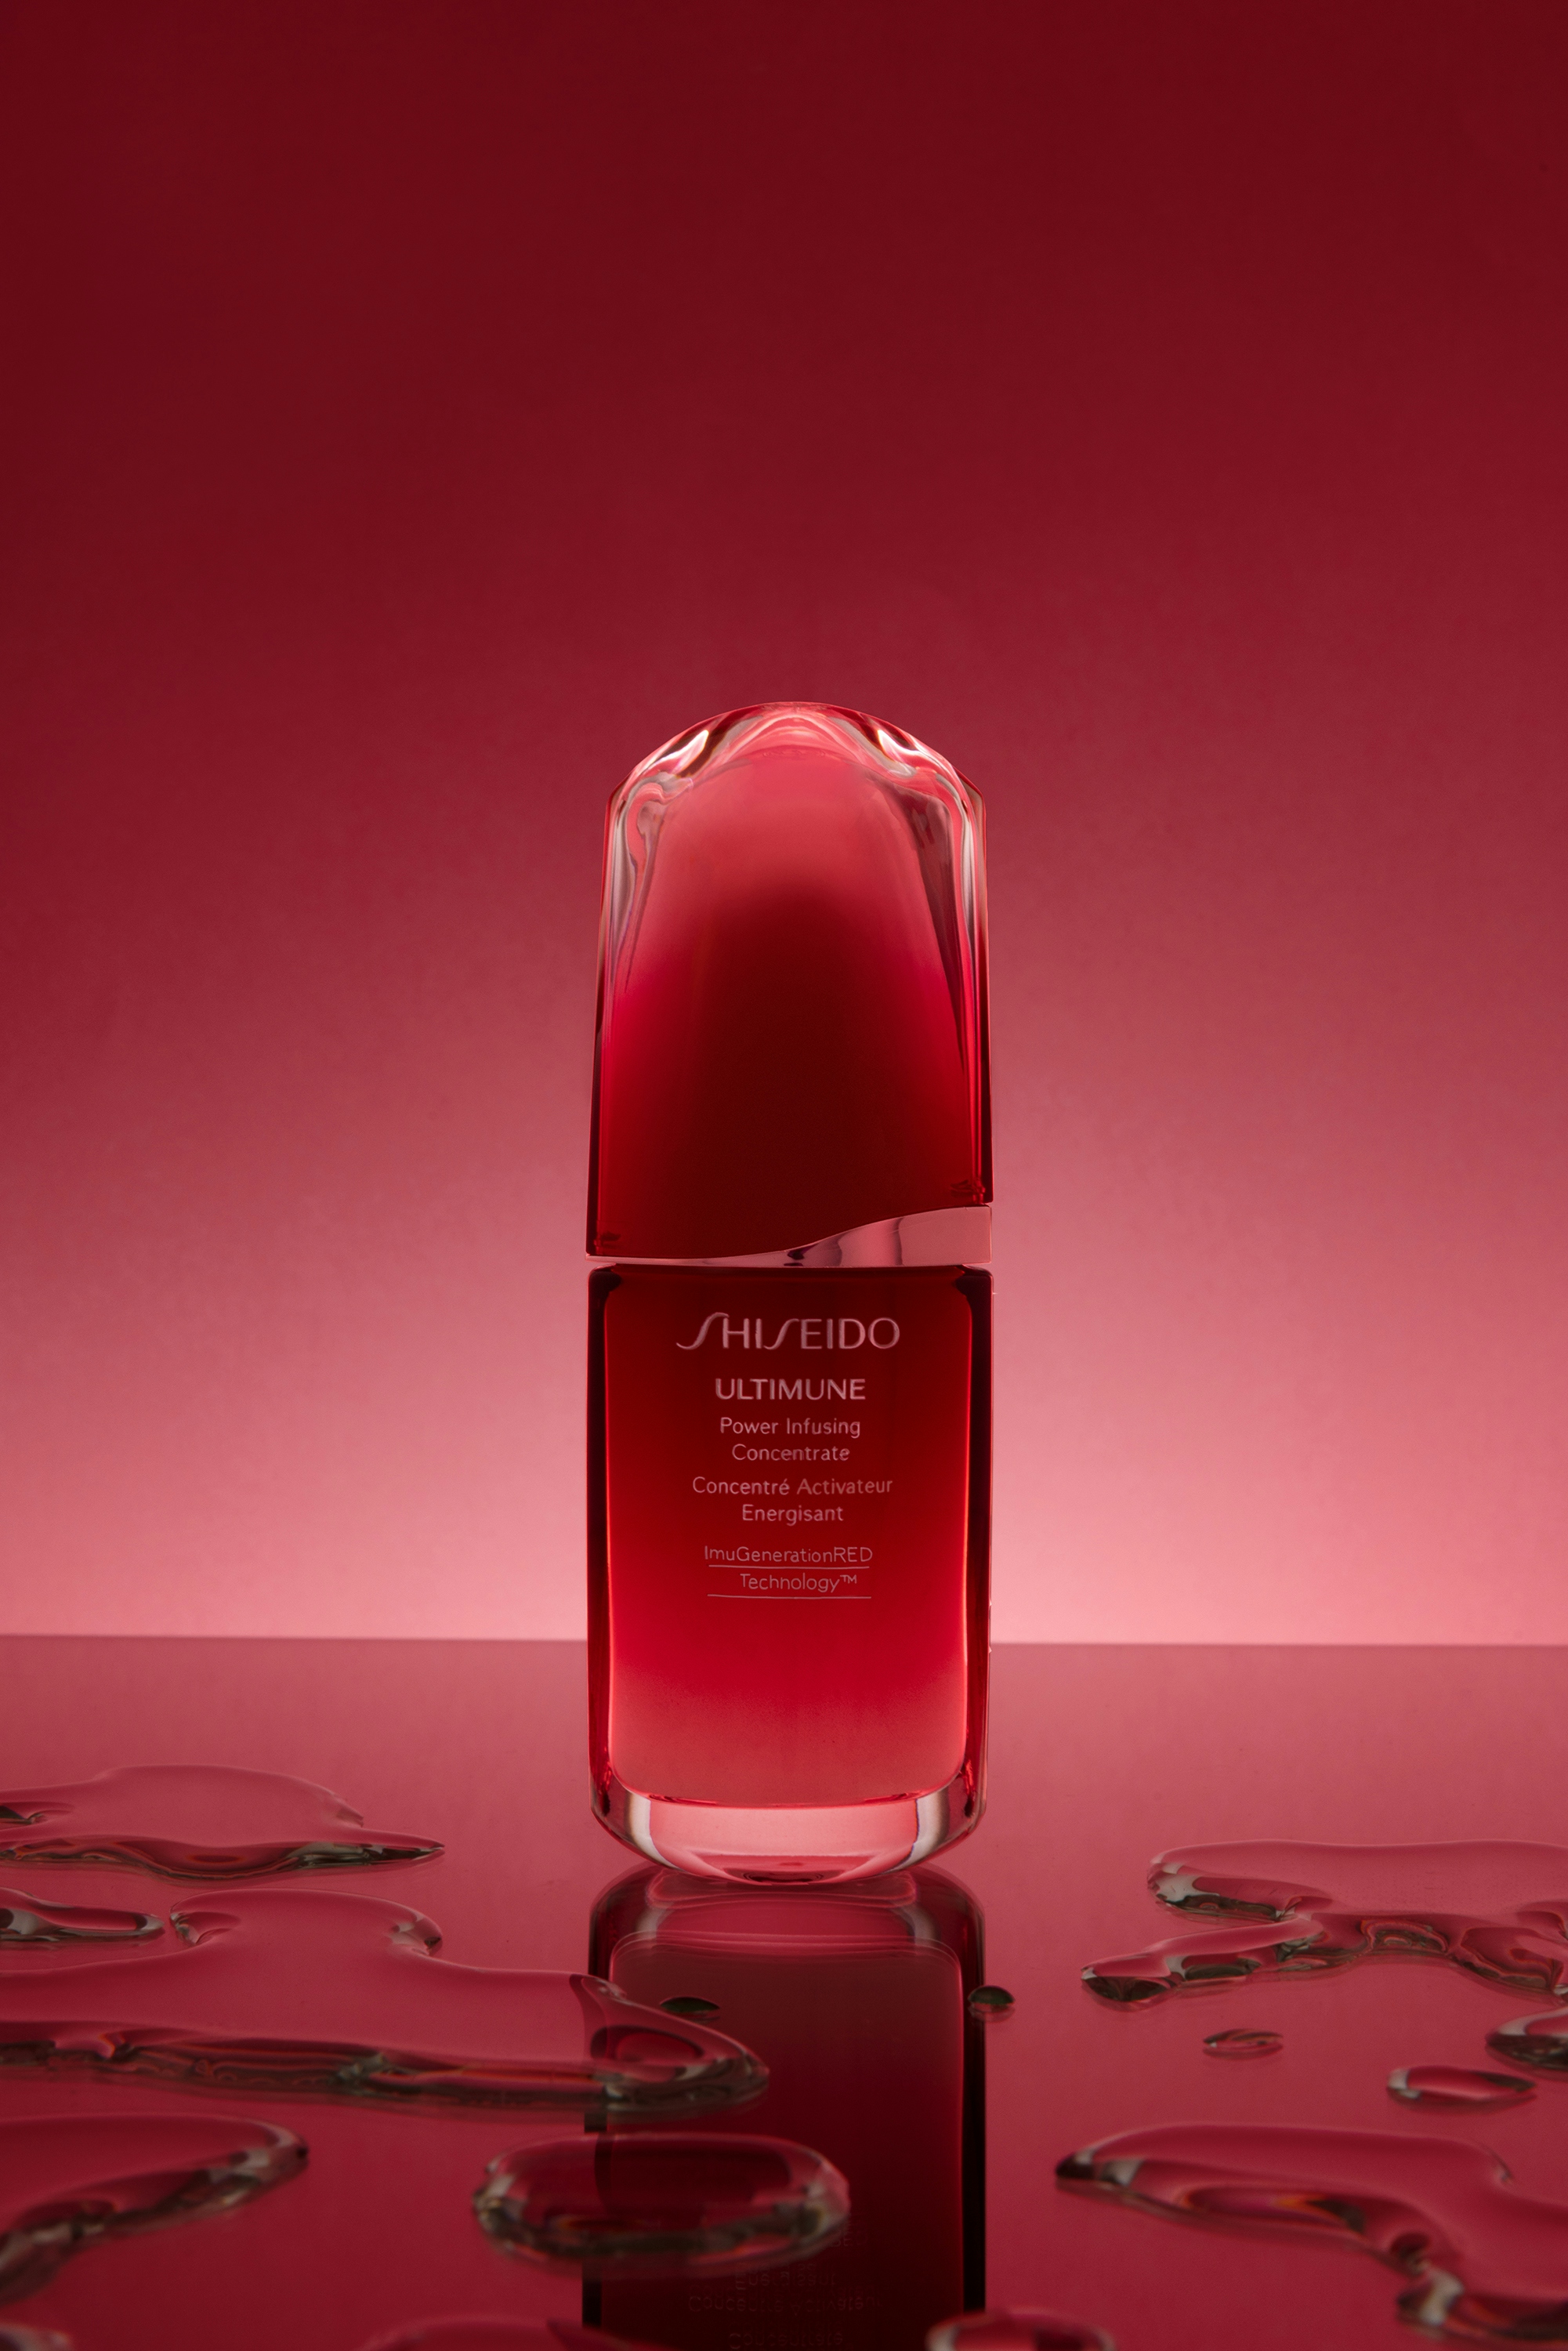 A bottle of liquid on a red table, with drops of water all over the surface